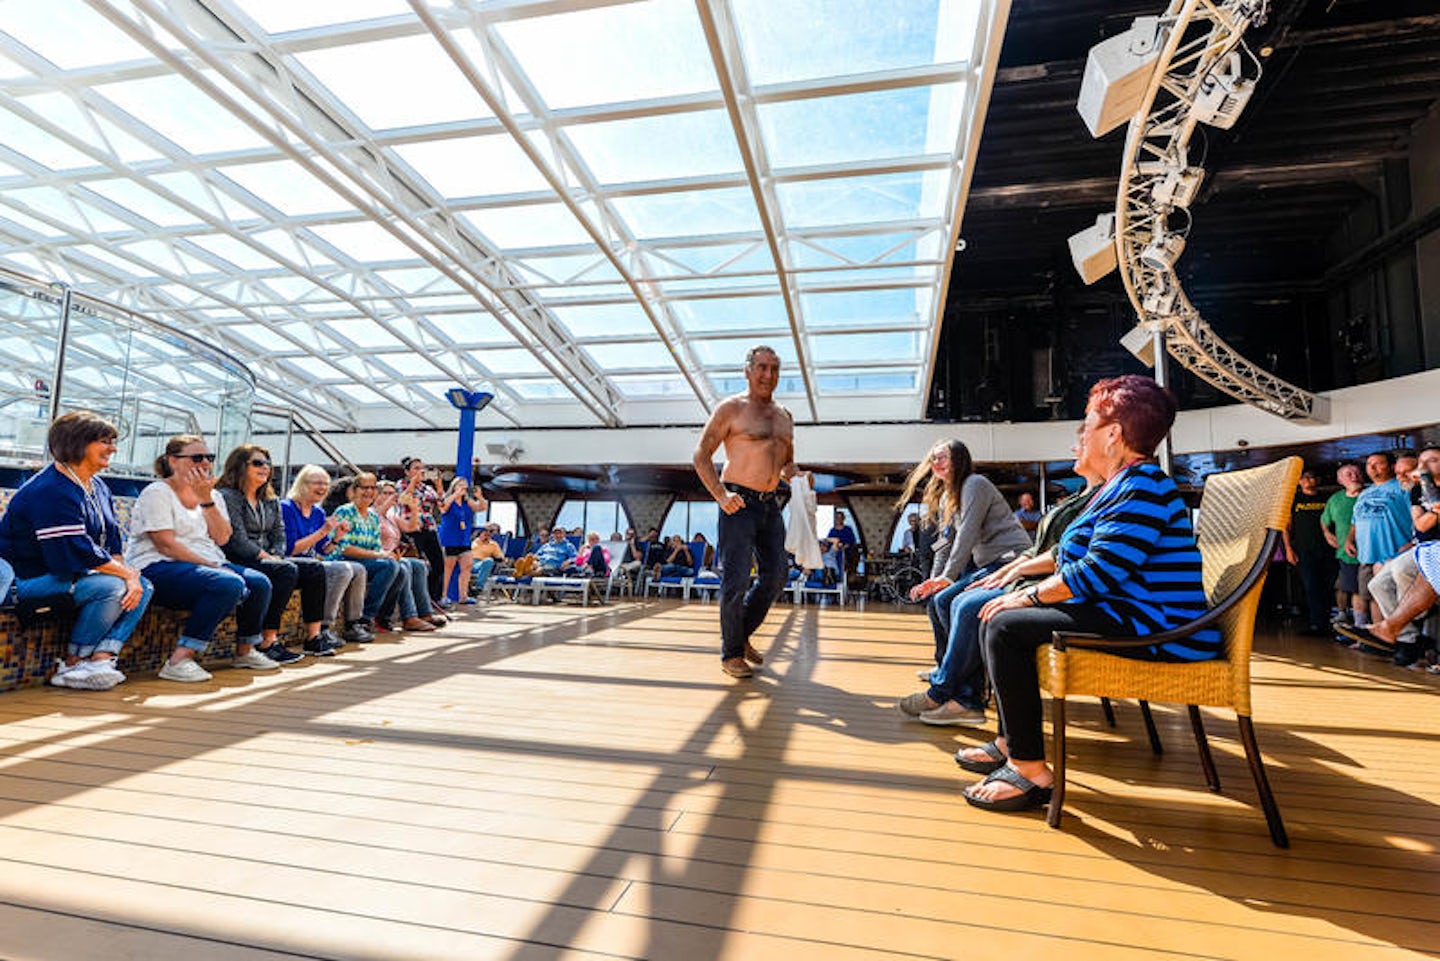 Hairy Chest Contest on Carnival Legend